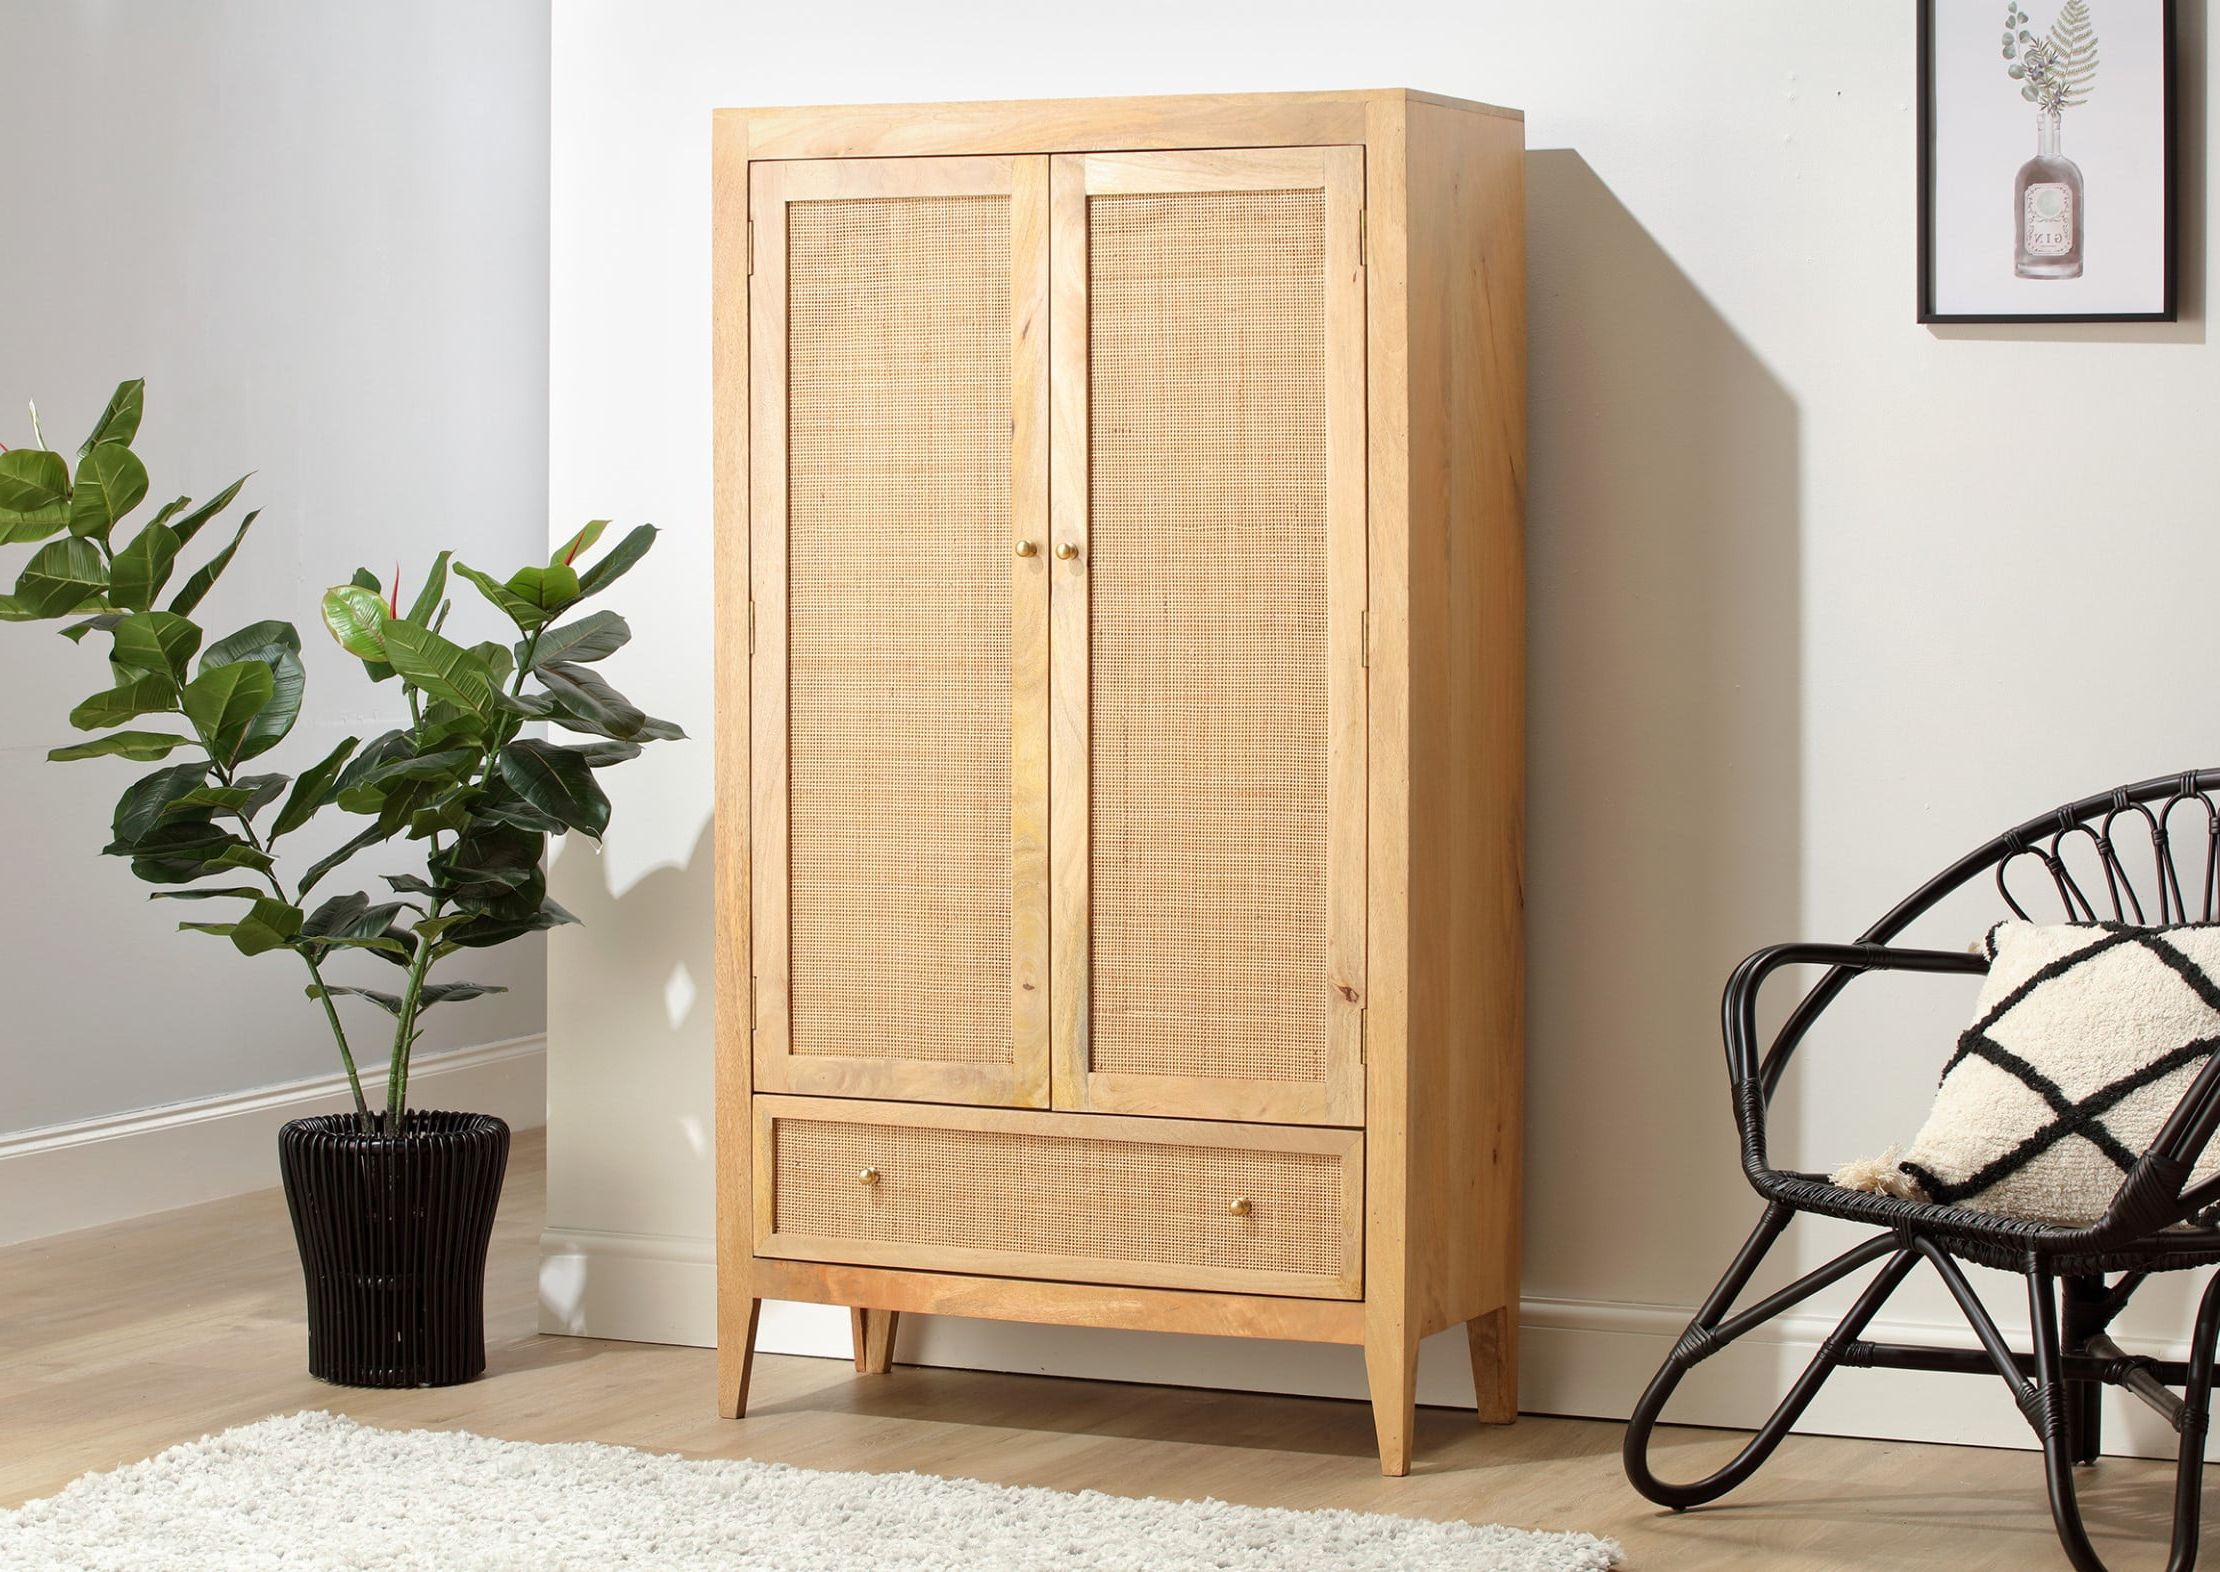 Venice Mango Wood Wardrobe With Natural Rattan | Eco Friendly And  Sustainable Furniture Regarding Wicker Armoire Wardrobes (View 14 of 20)